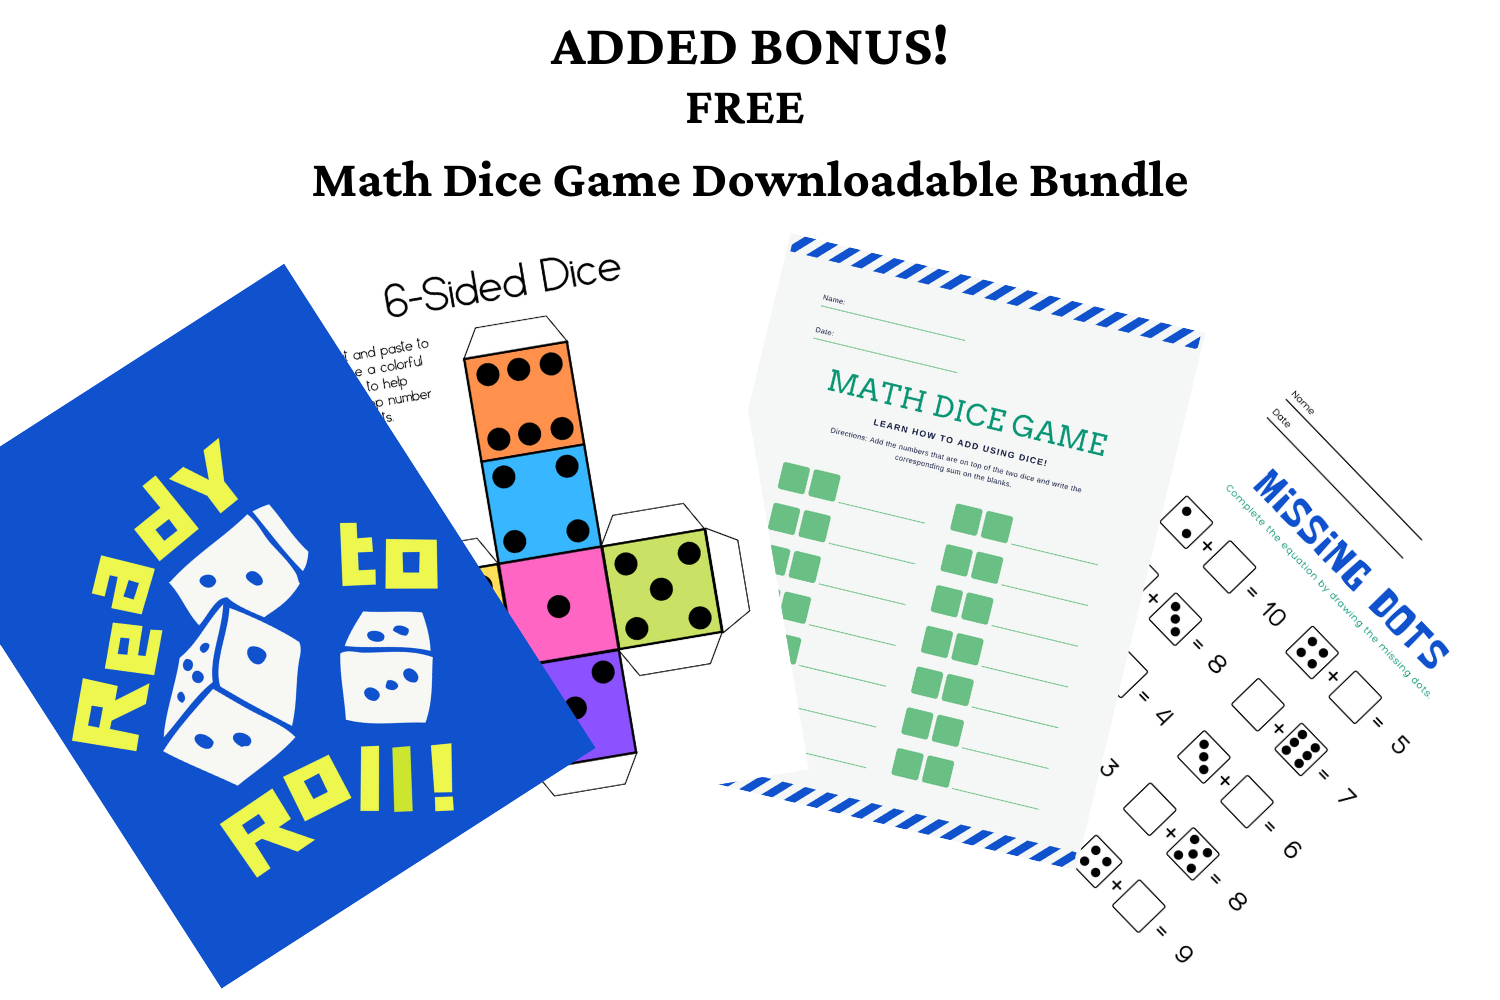 FREE math dice game download bundle with purchase of Tiny Polka Dot Math Game!